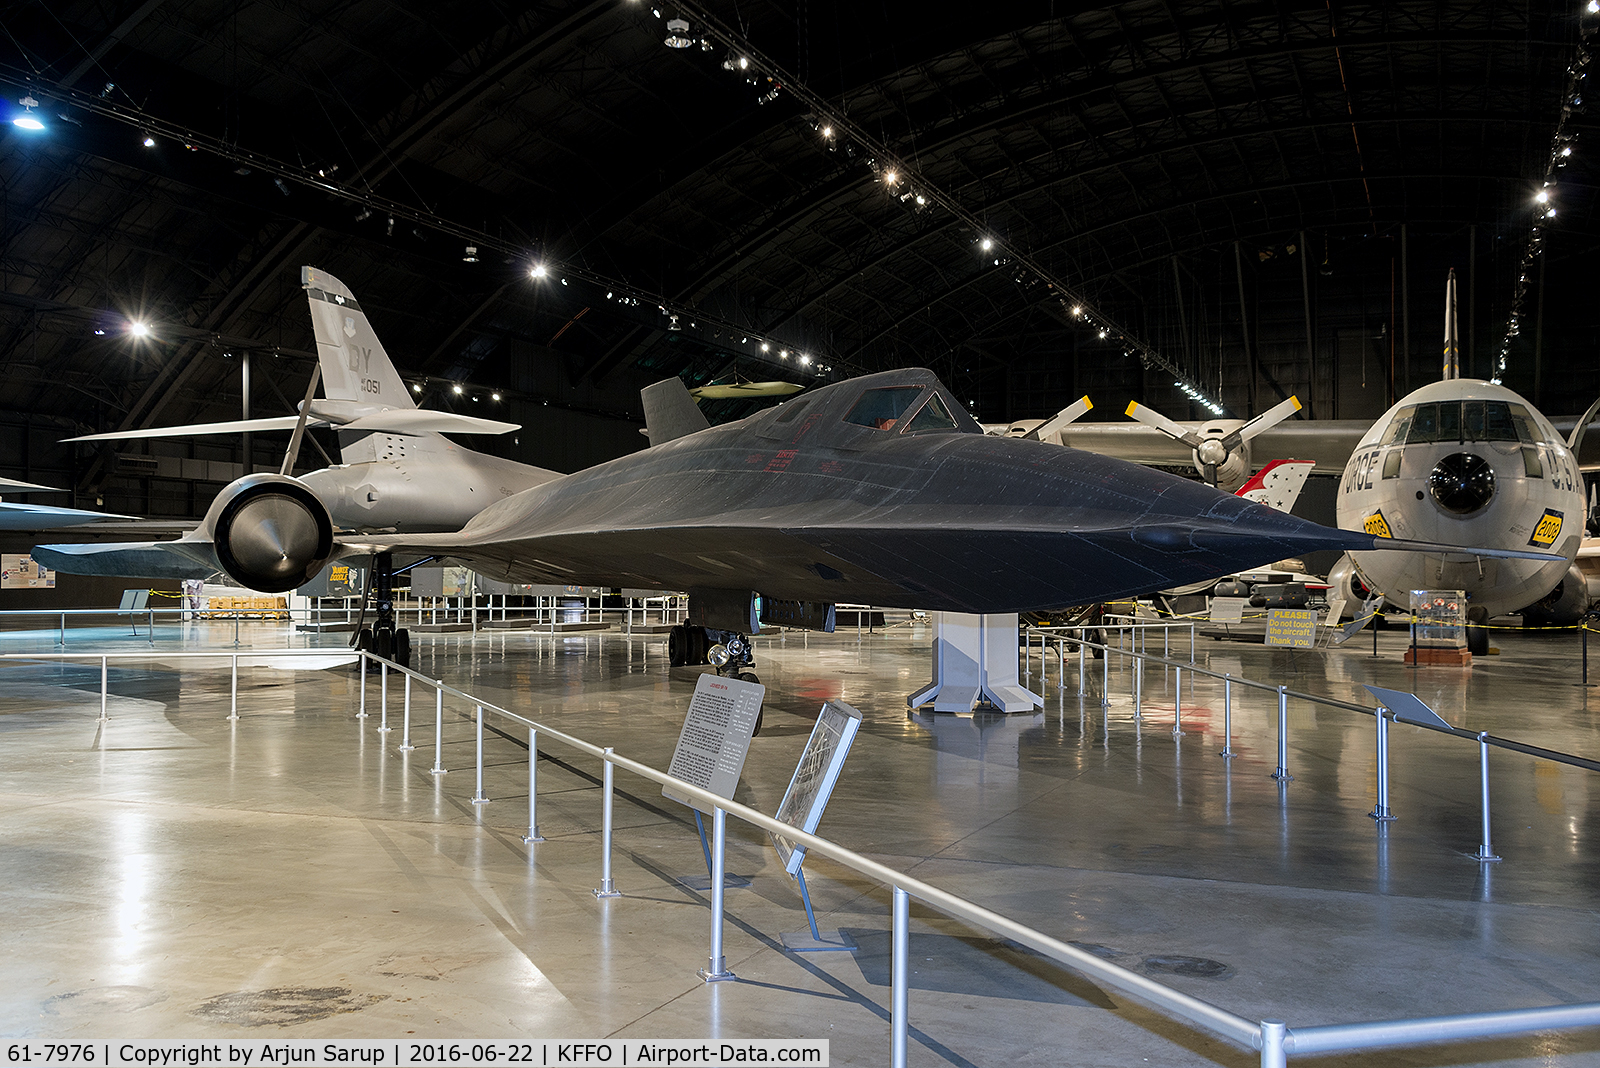 61-7976, 1961 Lockheed SR-71A Blackbird C/N 2027, On display at the National Museum of the U.S. Air Force.  The first SR-71 operational sortie was made in this aircraft, which flew a total of 942 sorties, including 257 operational missions.  The aircraft was flown to the museum in 1990.